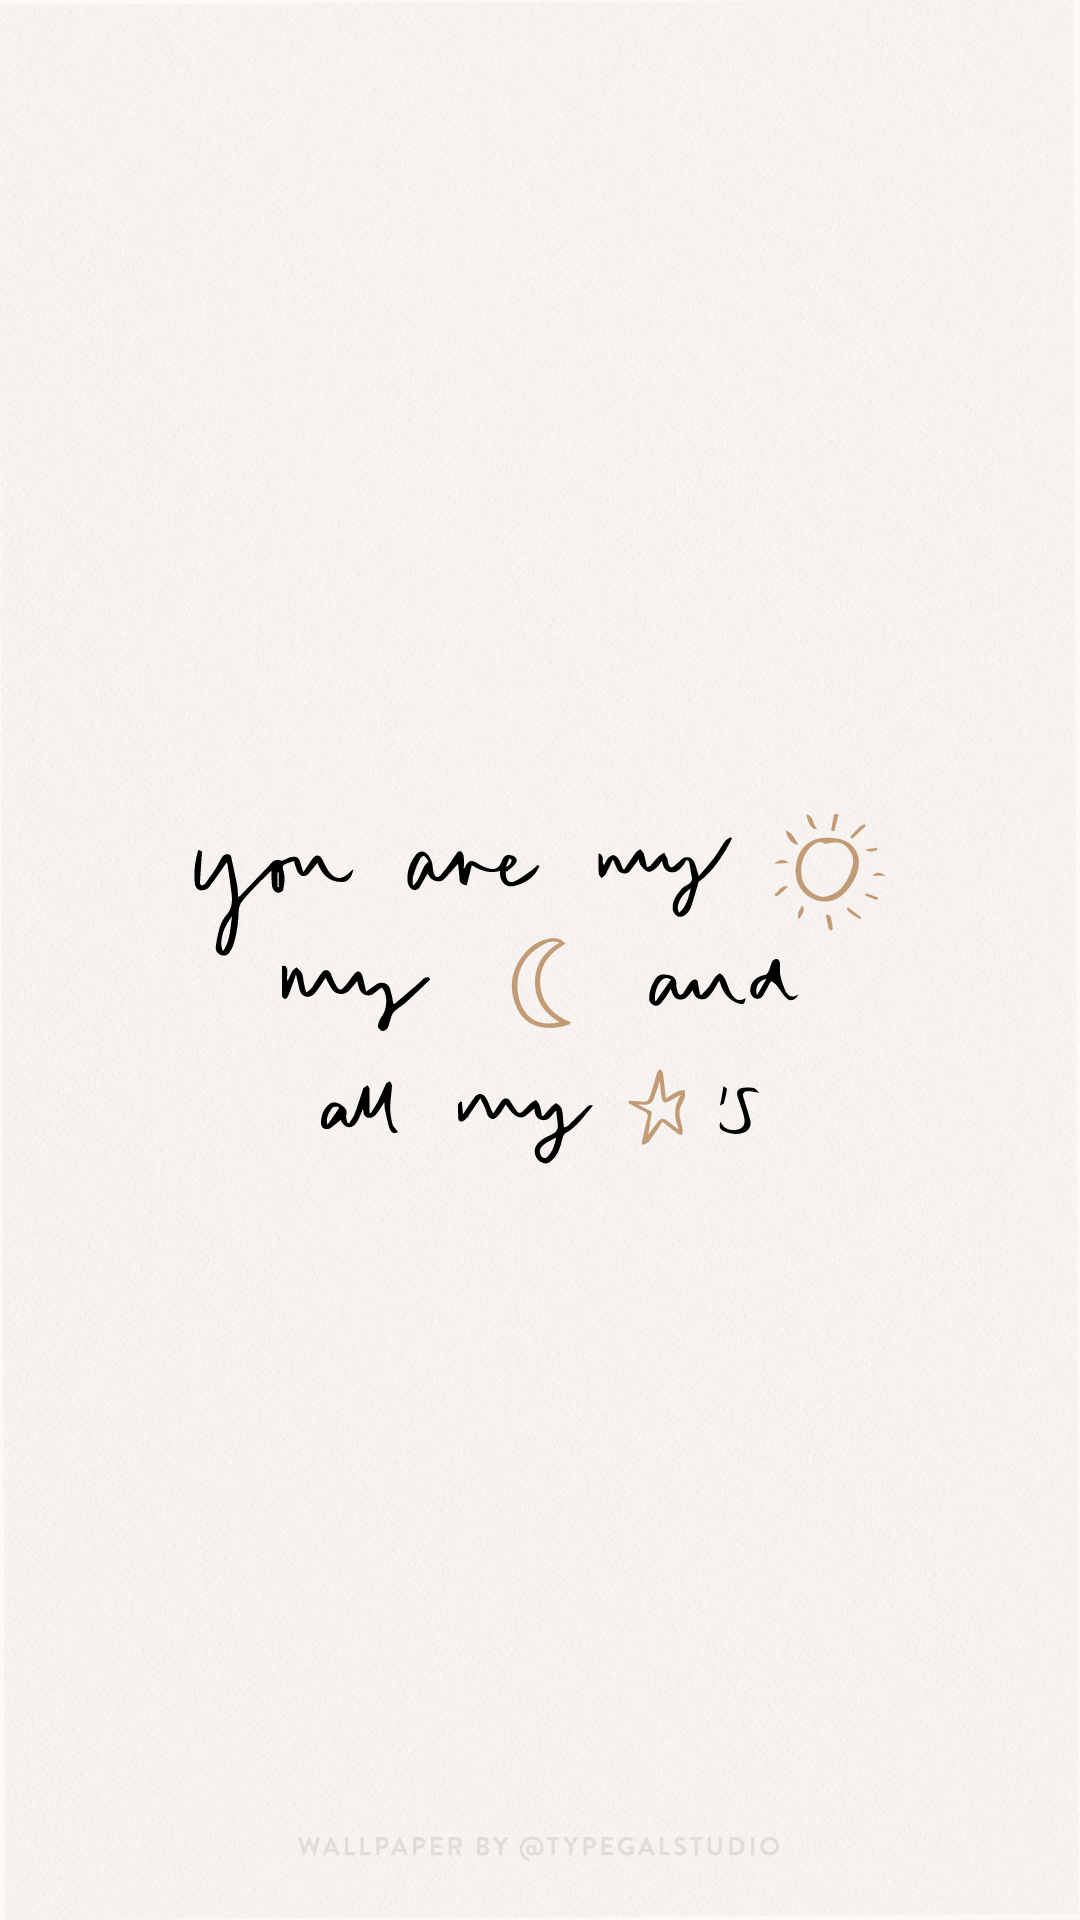 Hand lettered quote wallpaper. You are my sun, moon and all my